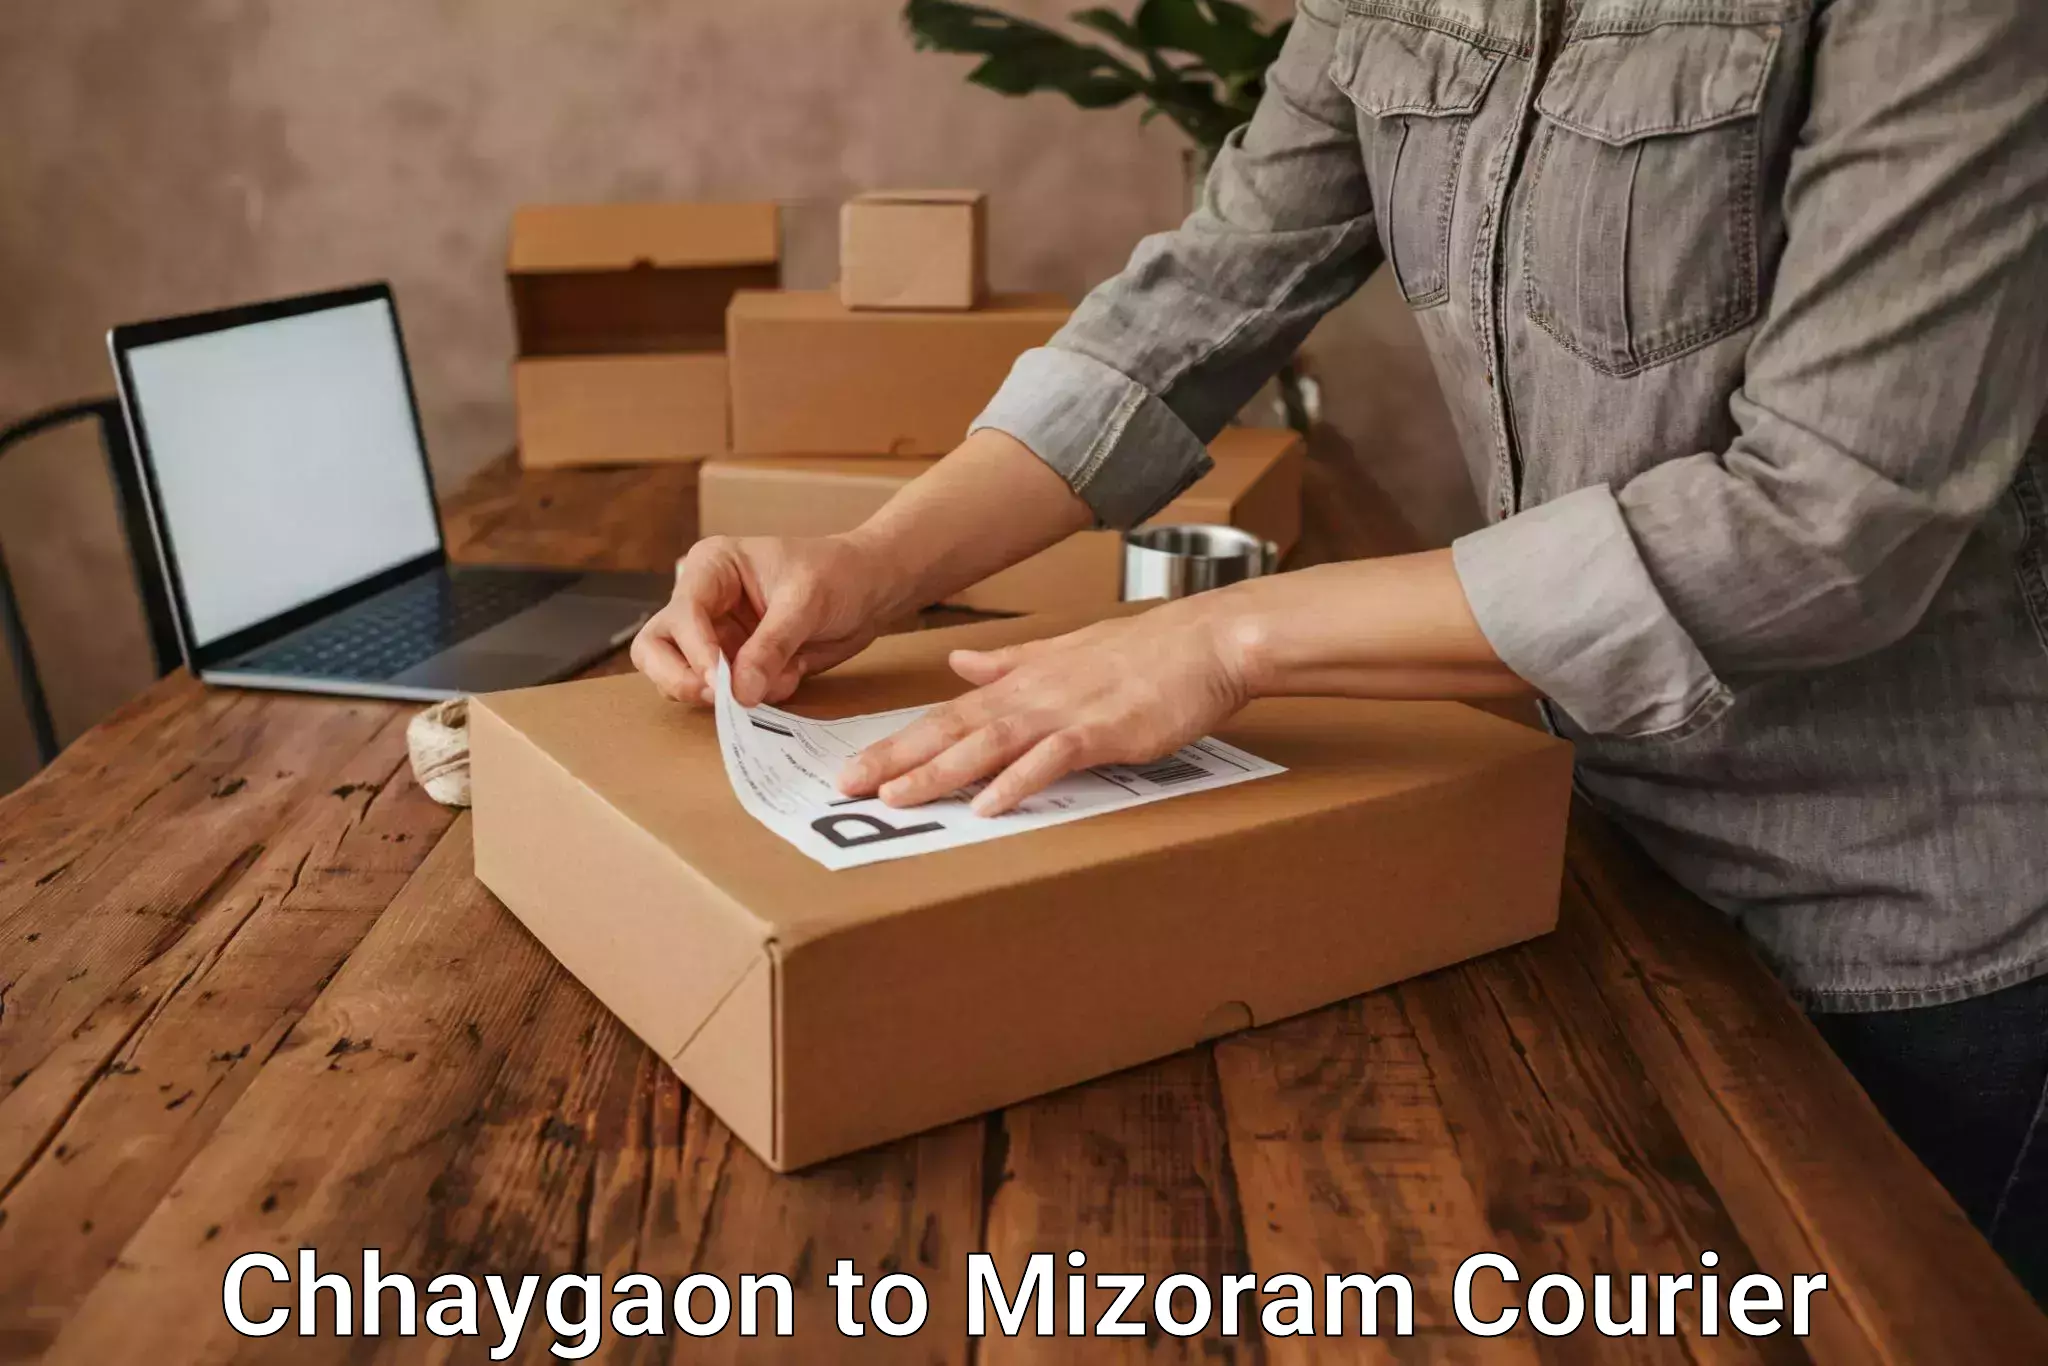 Efficient parcel service Chhaygaon to Aizawl